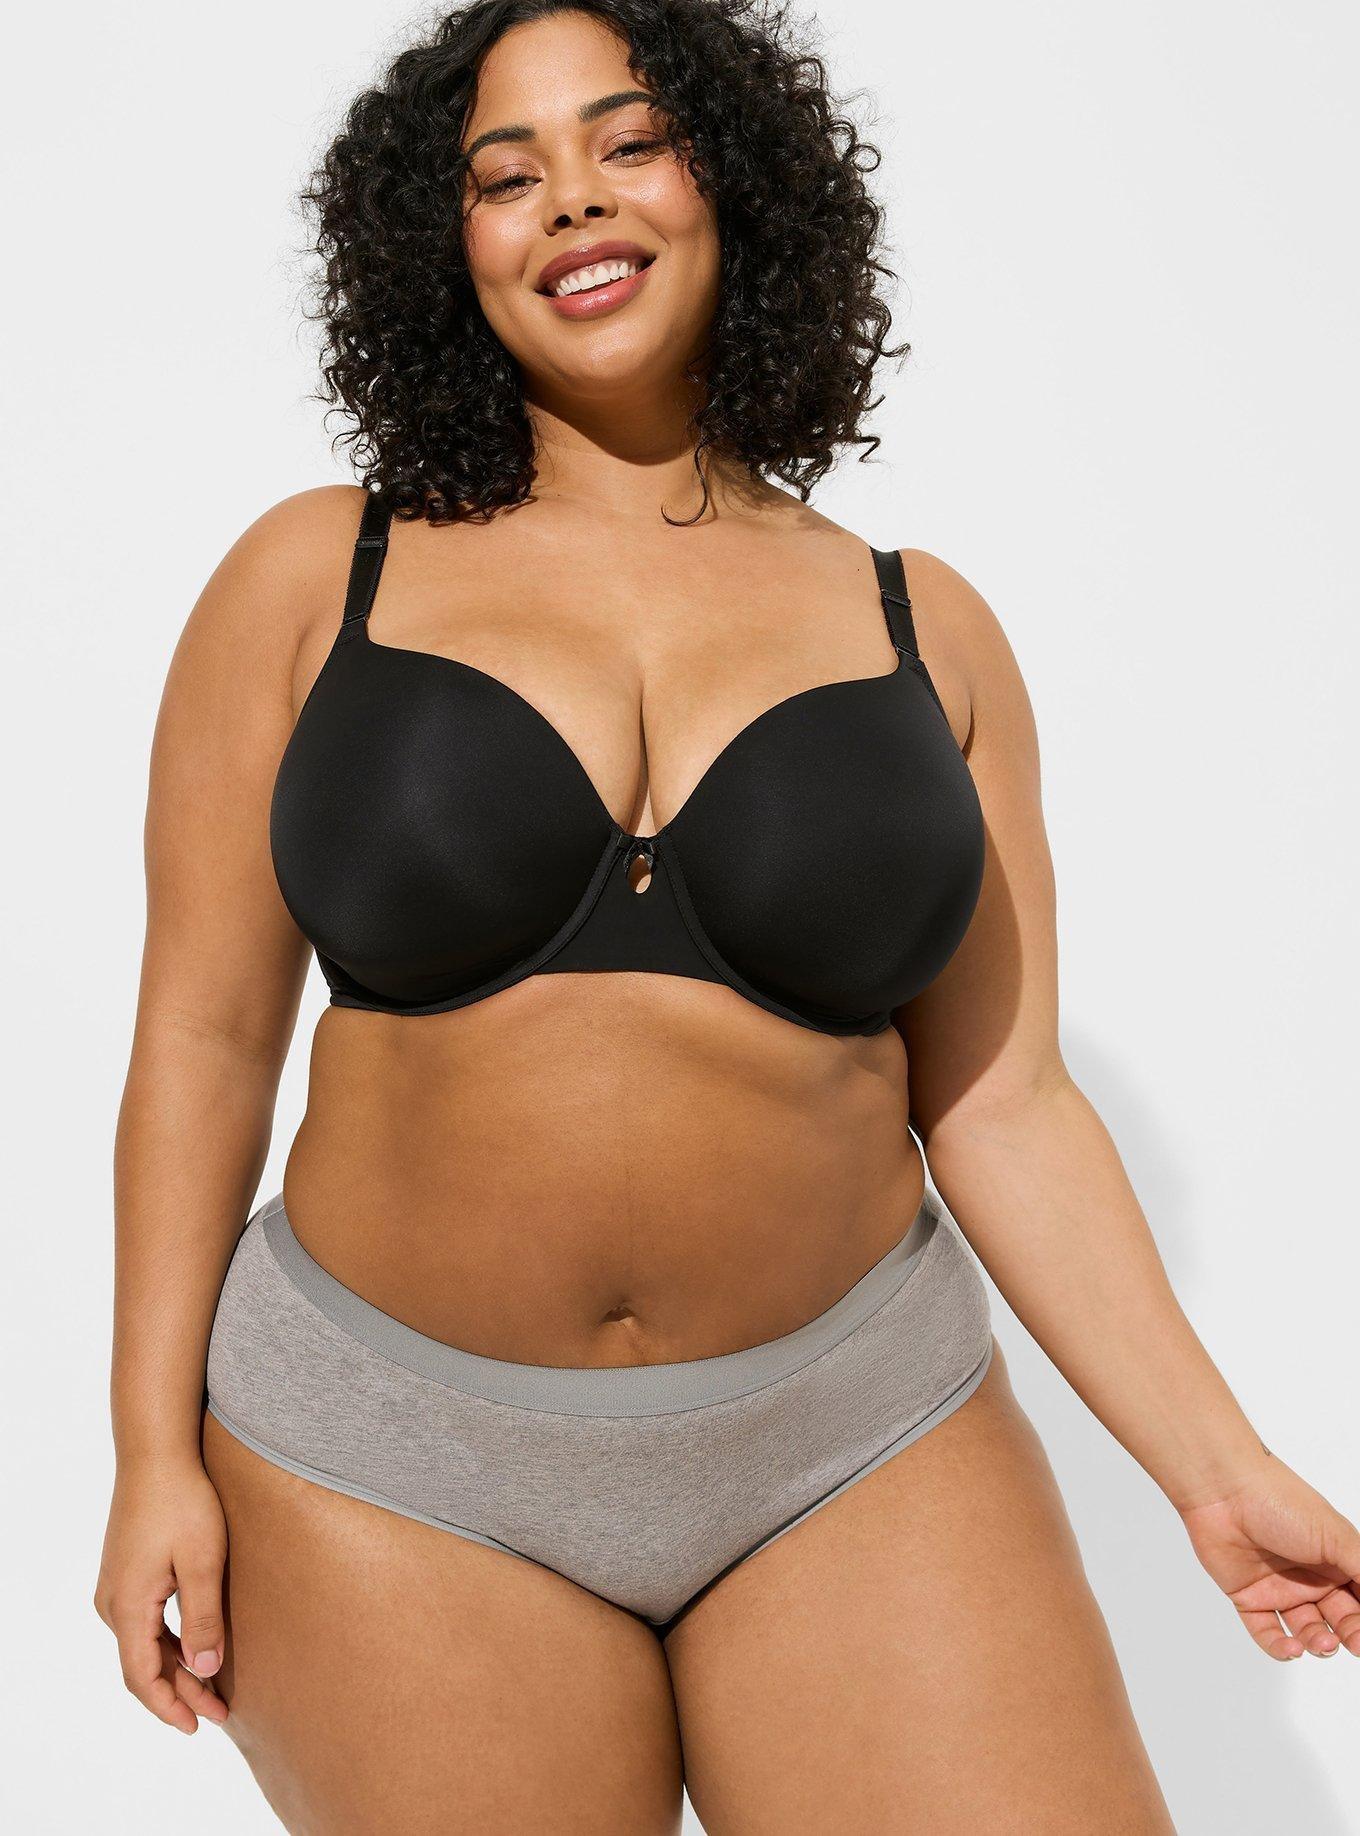 Plus Size High Waisted Panties & Underwear